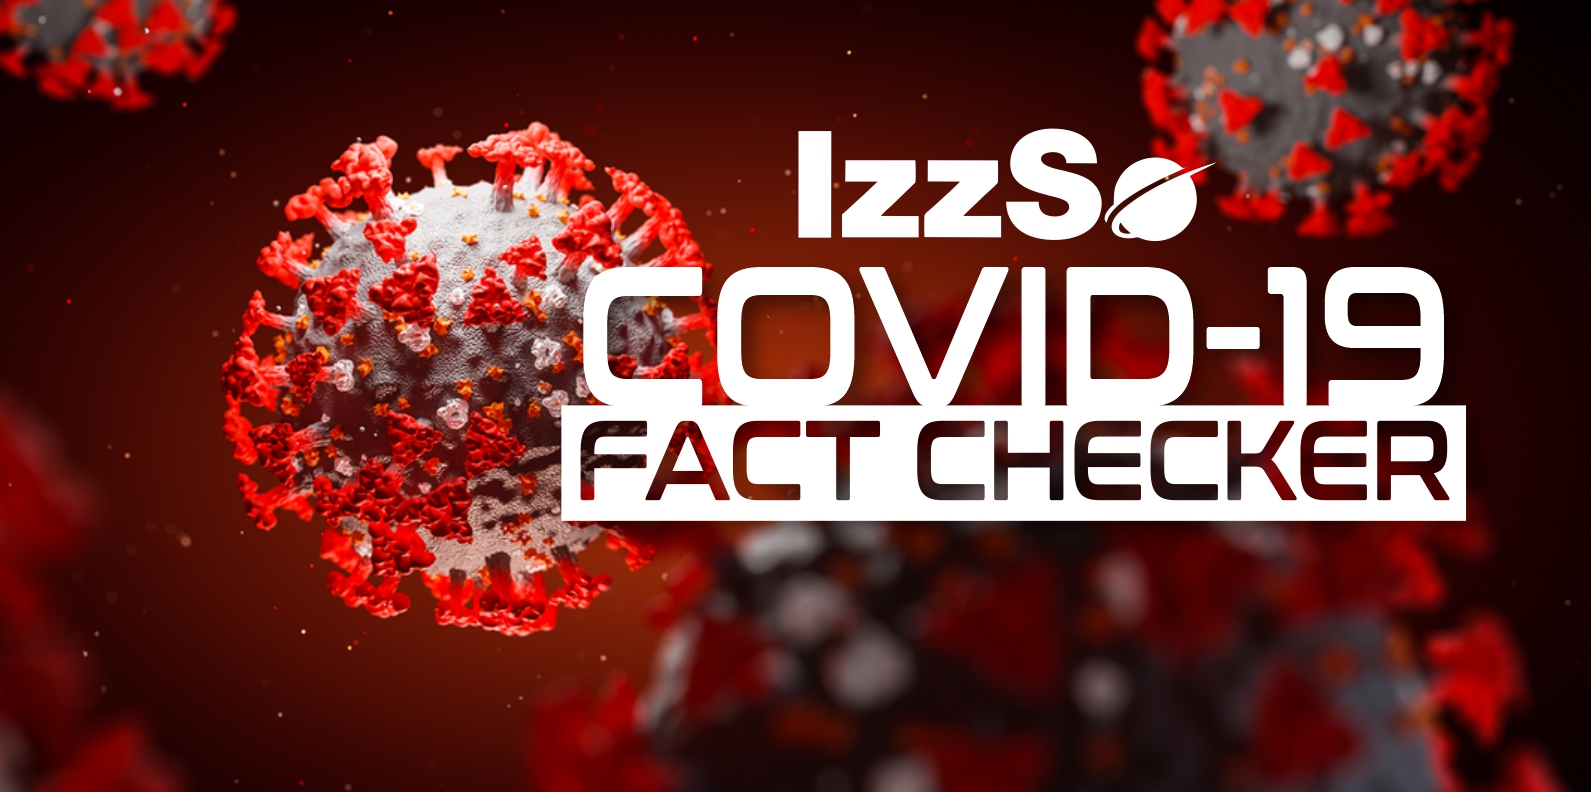 IzzSo Covid Fact checker-Reinfection may be possible.